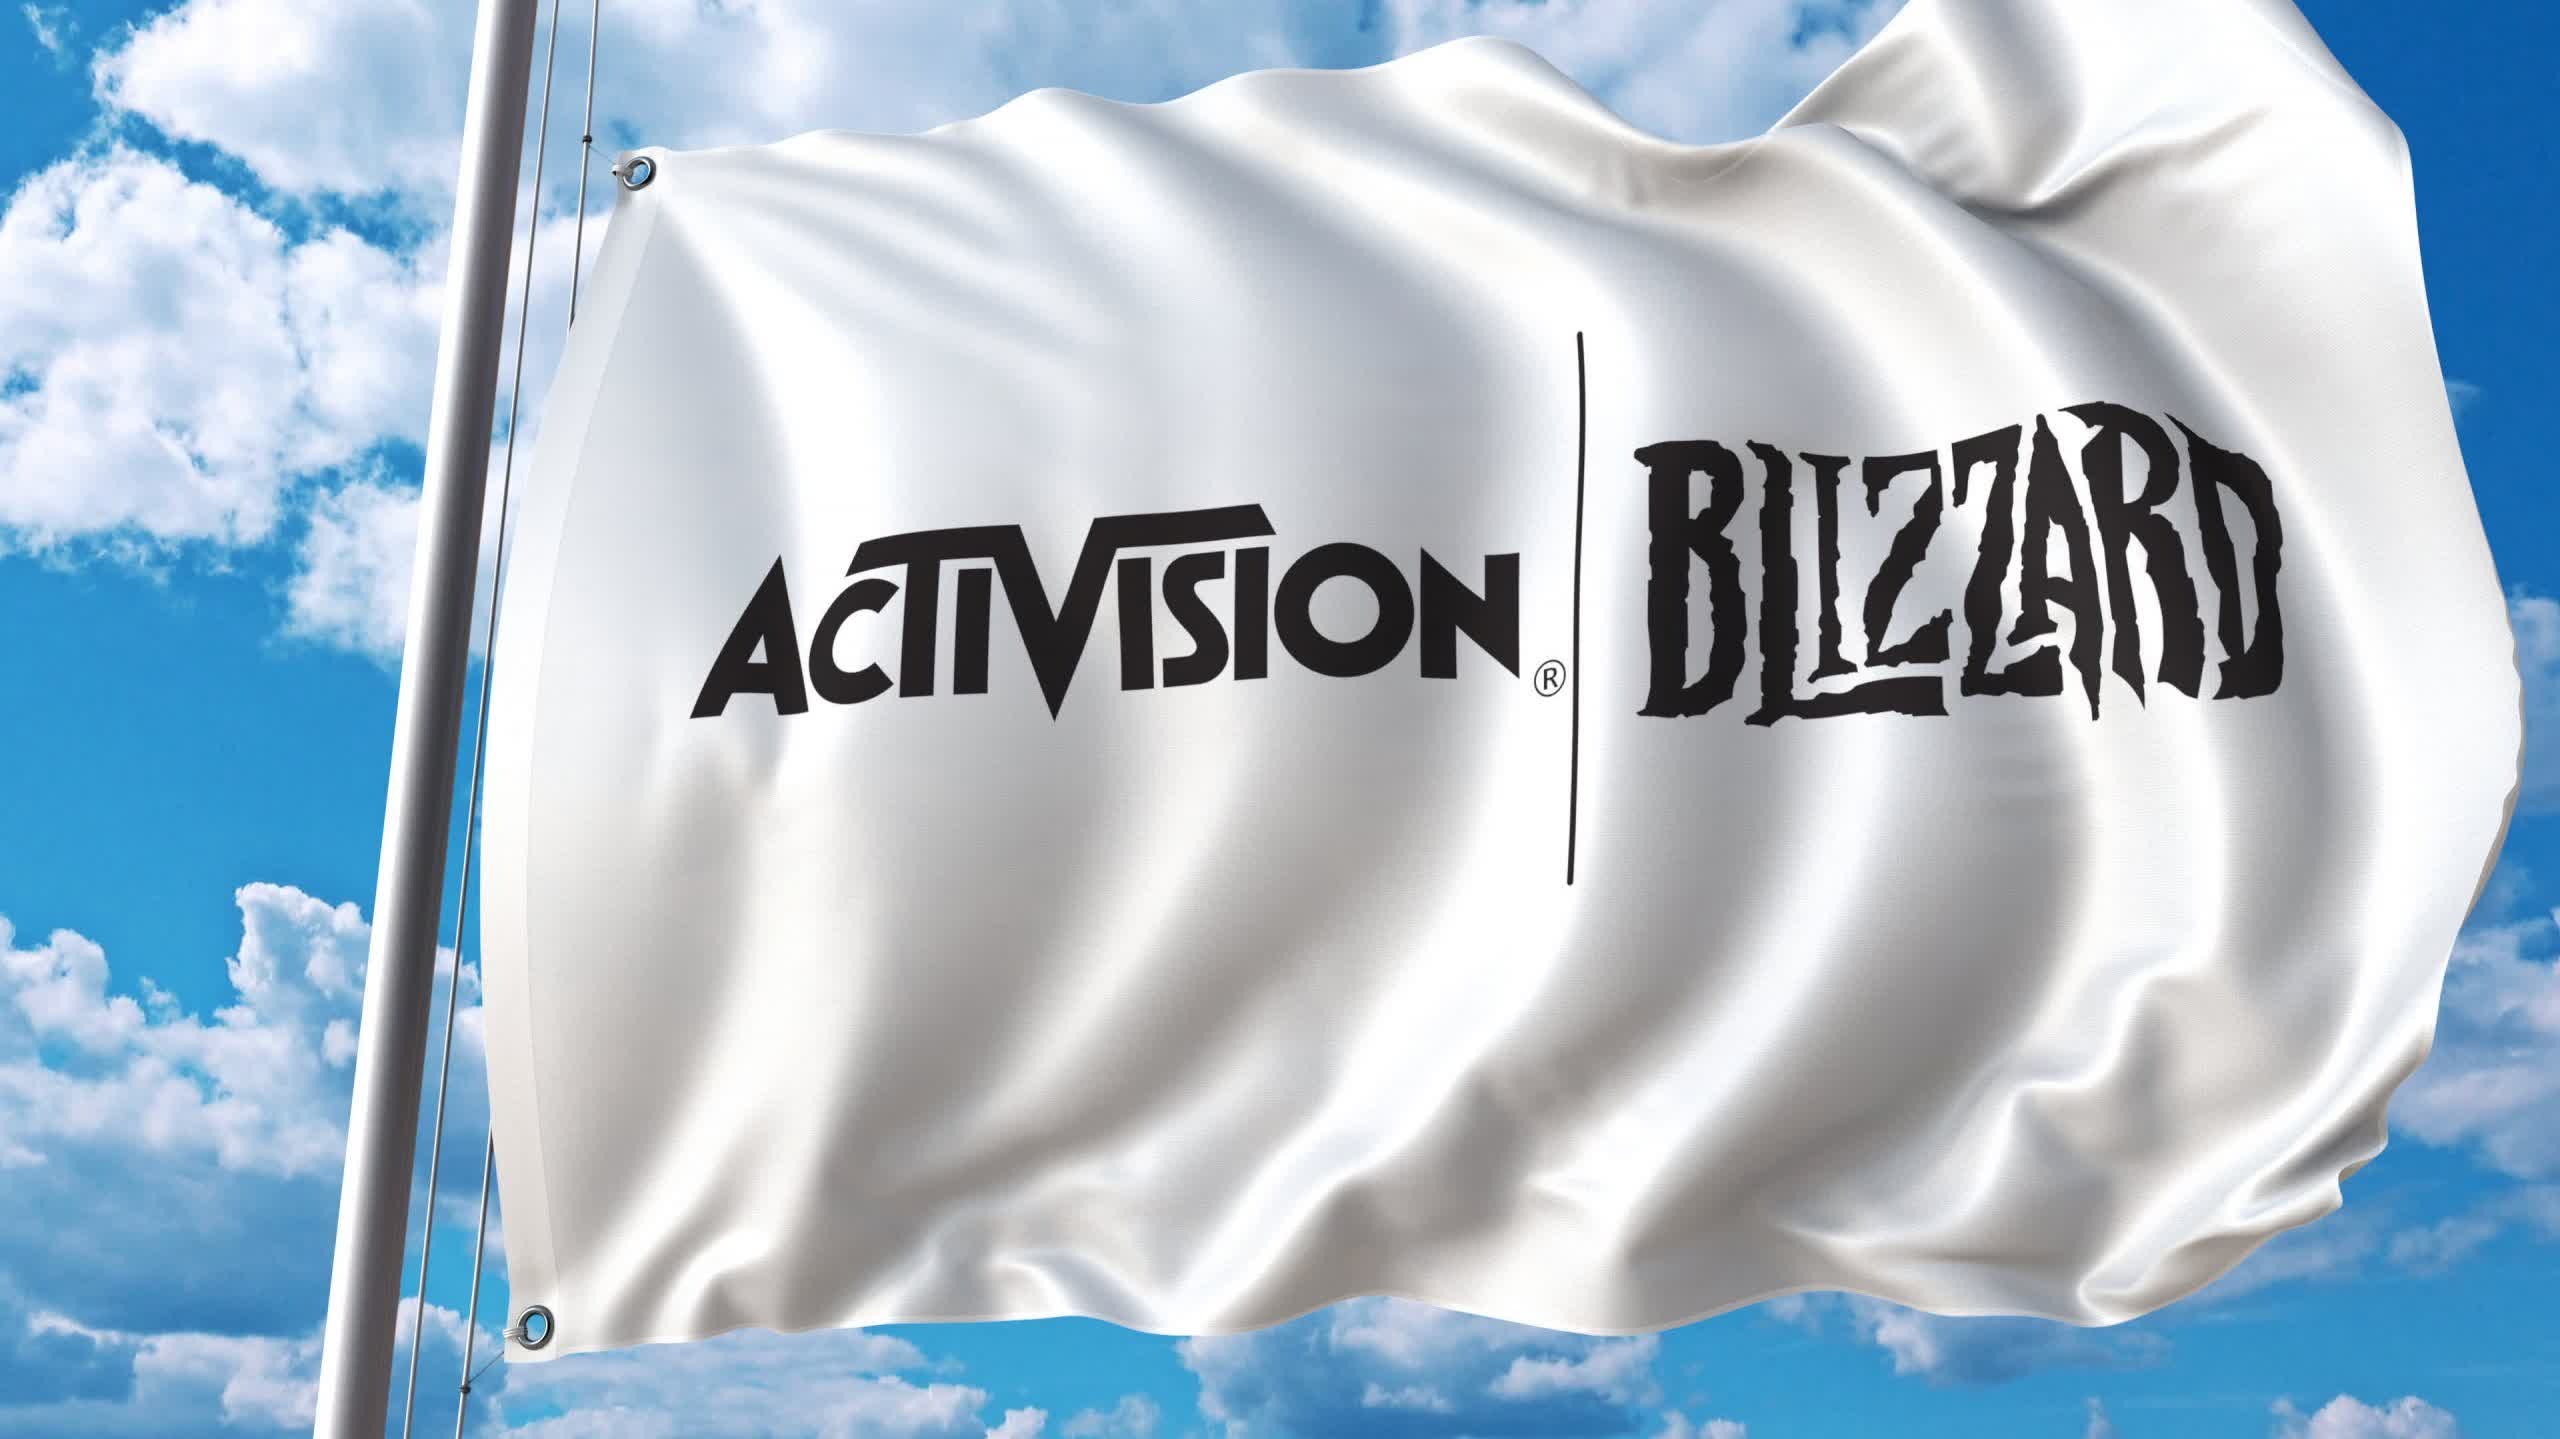 Activision CEO cuts own pay to $62,500 amid company's sexual harassment lawsuit